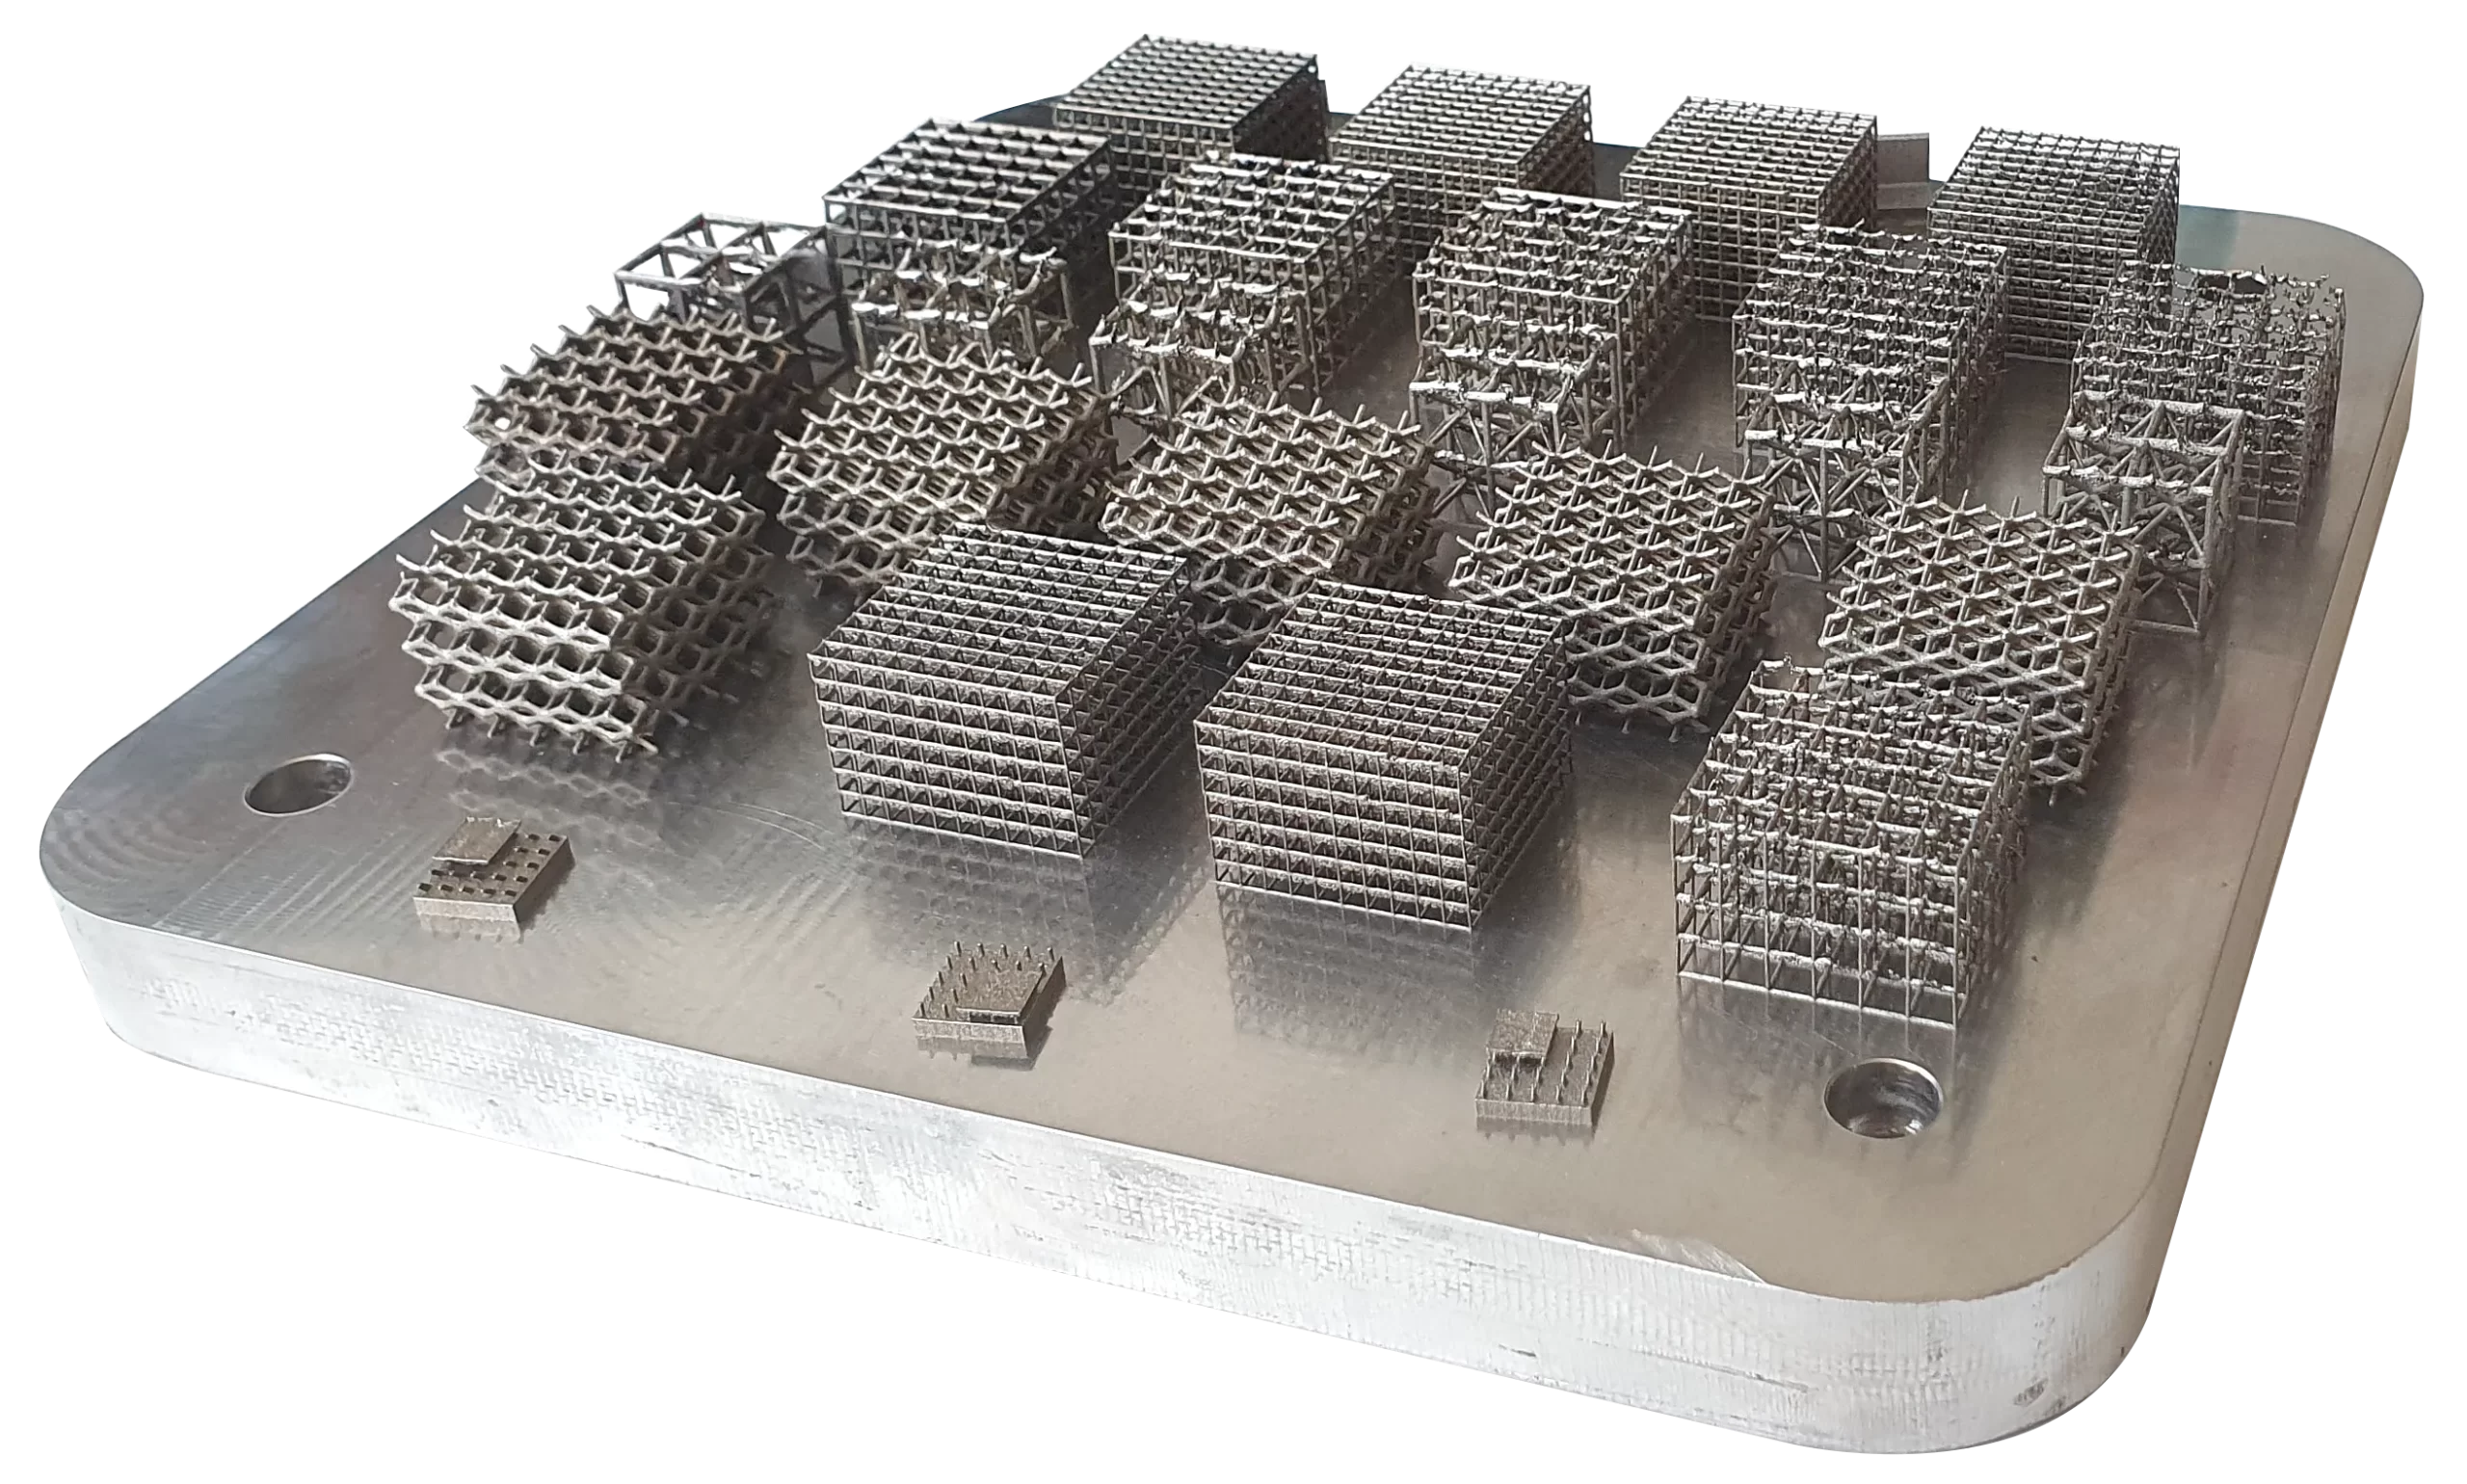 17-4PH-Stainless-Steel-Lattice-Cells-scaled